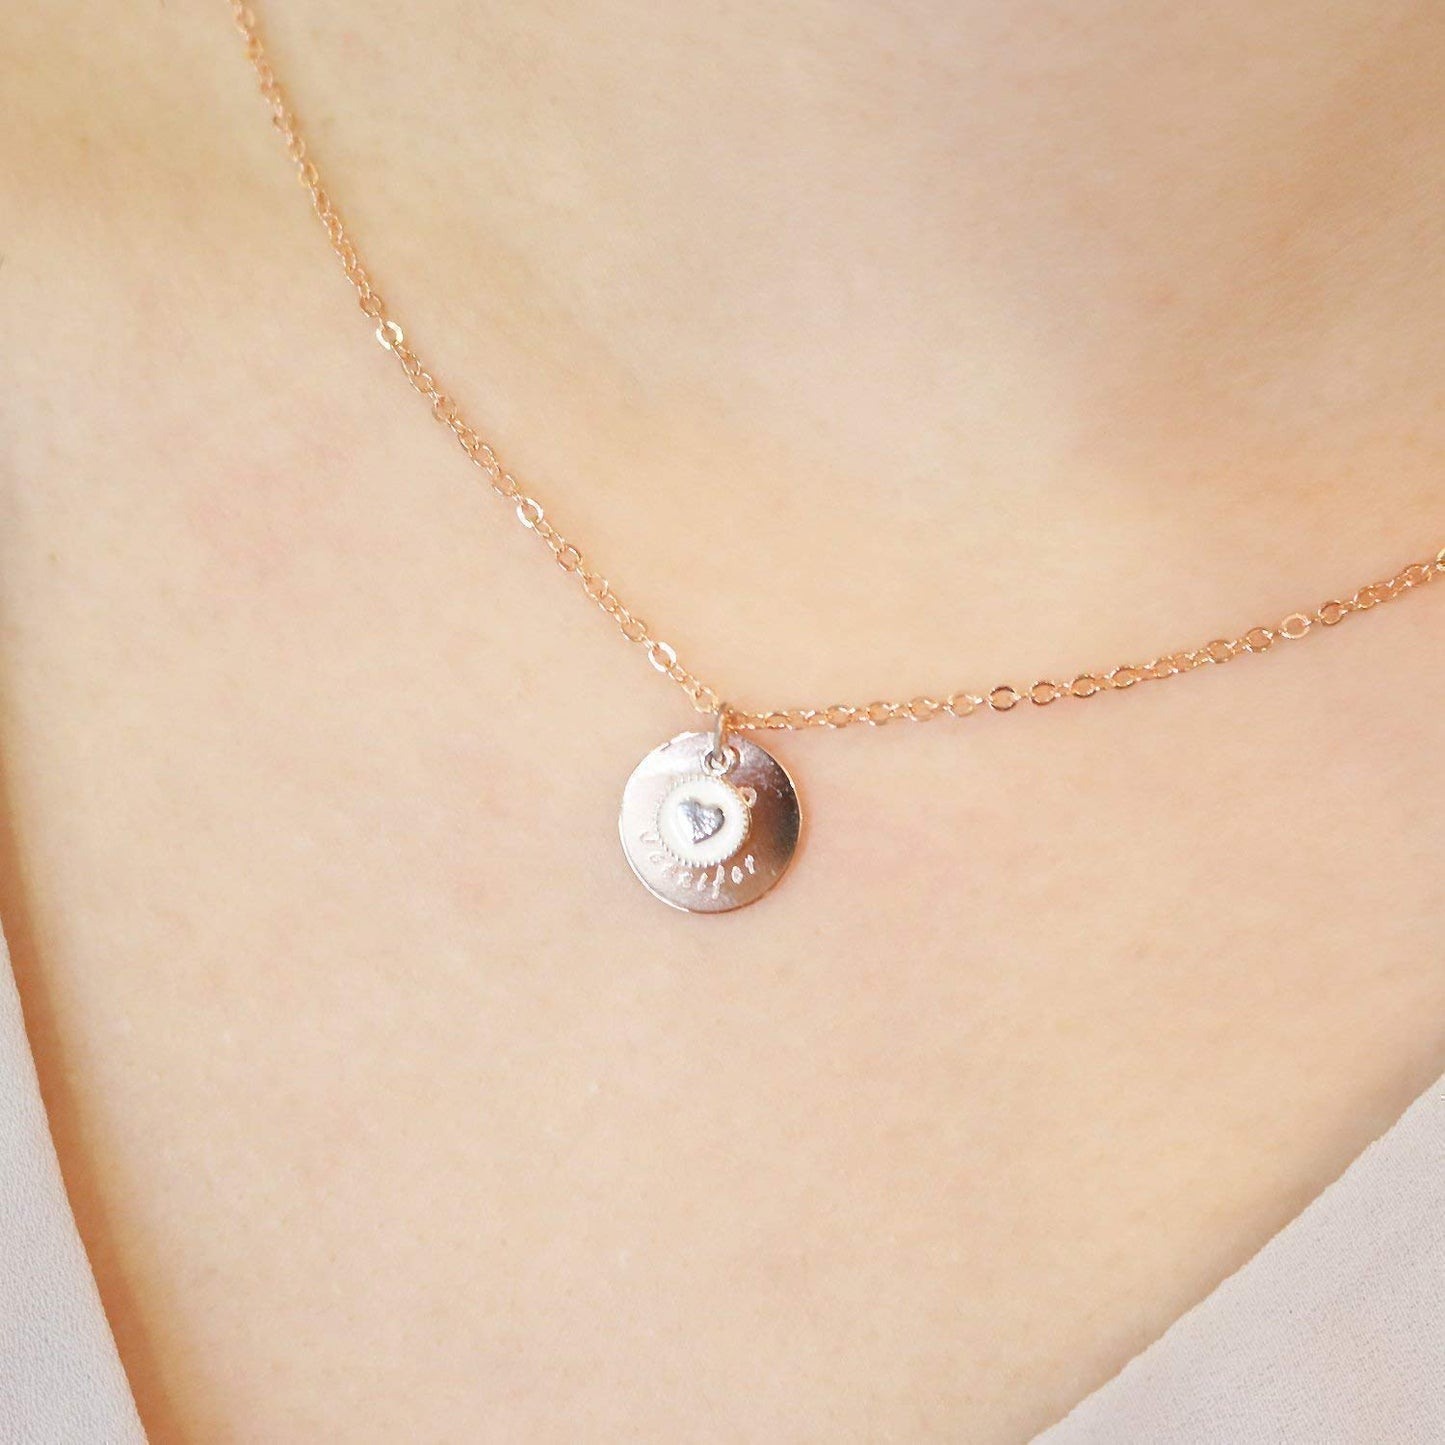 Coin Disc Necklace with heart charm - Personalized gift for birthday